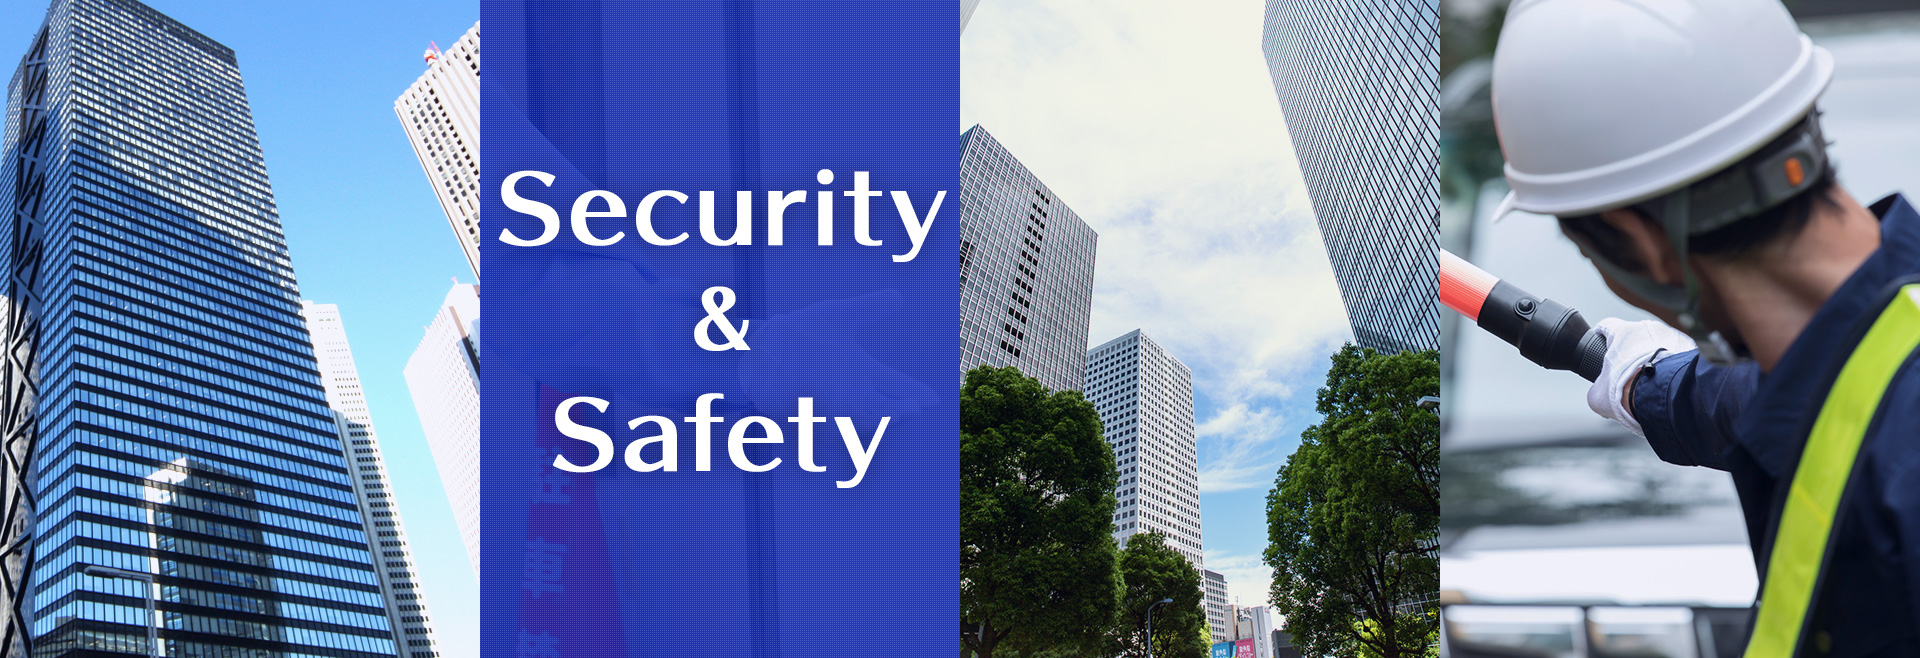 Security＆Safety